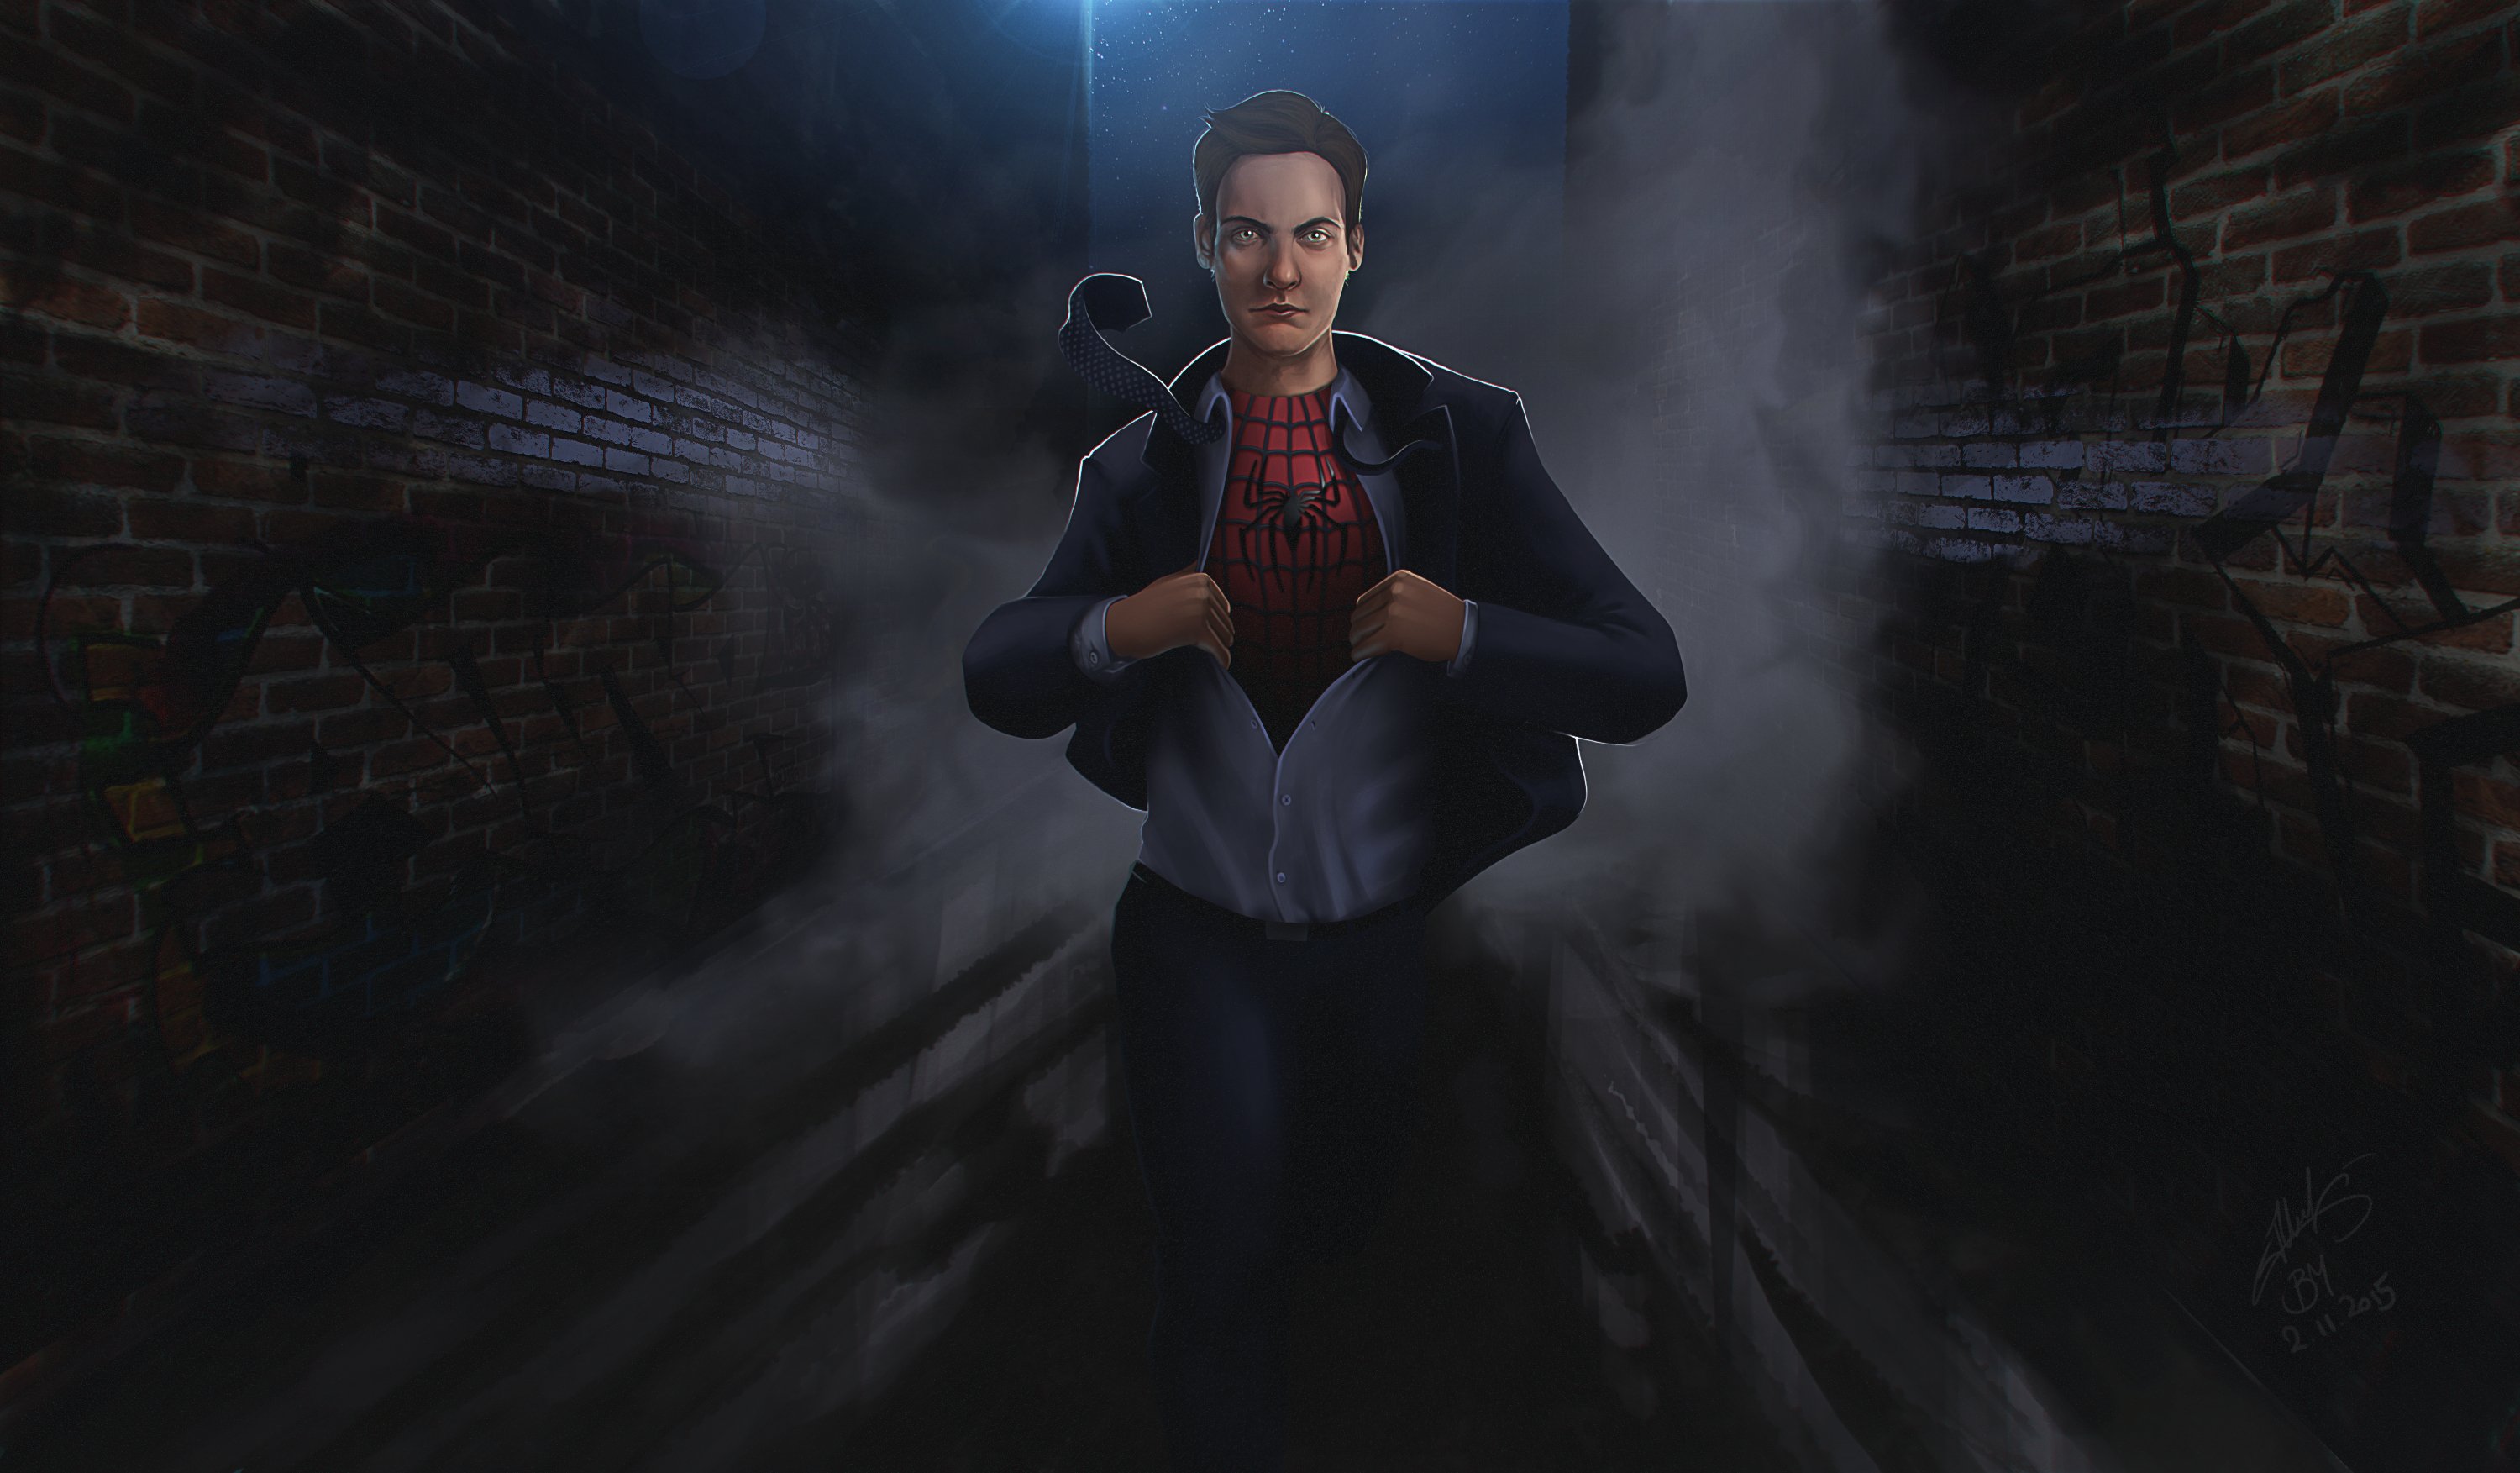 Spiderman Tobey Maguire, HD Superheroes, 4k Wallpapers, Image, Backgrounds,...